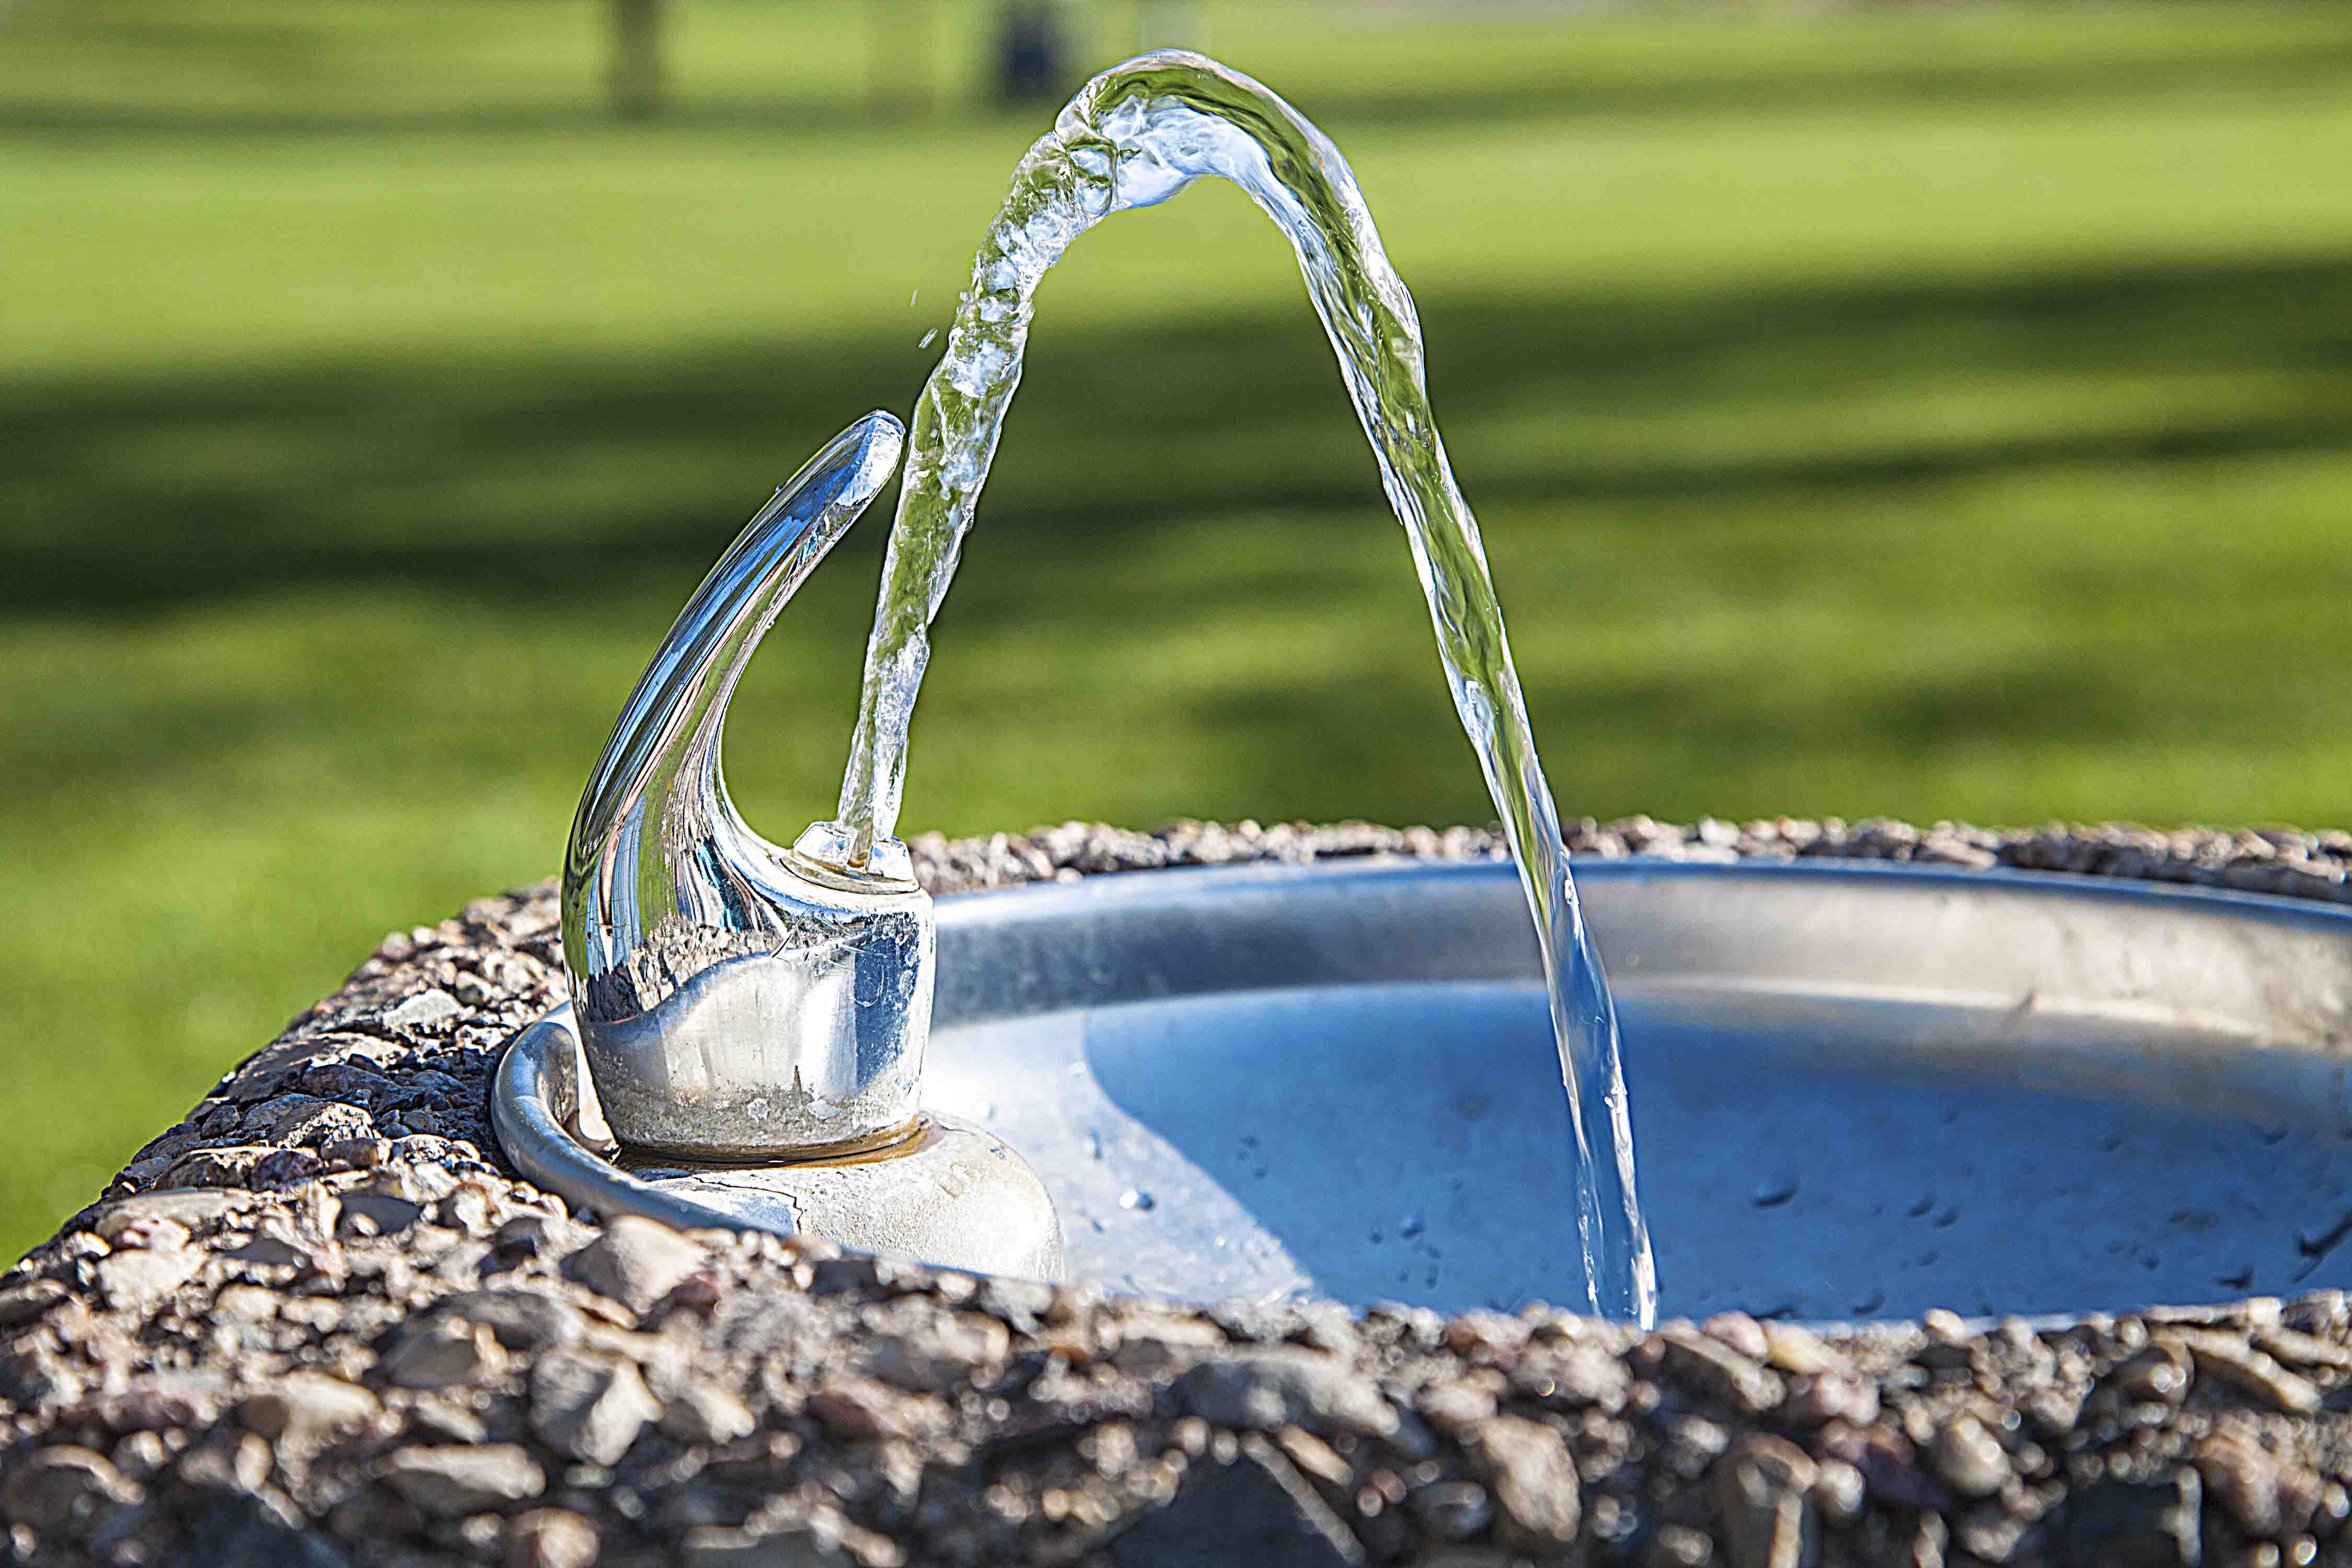 Maintain Your Septic to Protect Your Water | Angie's List